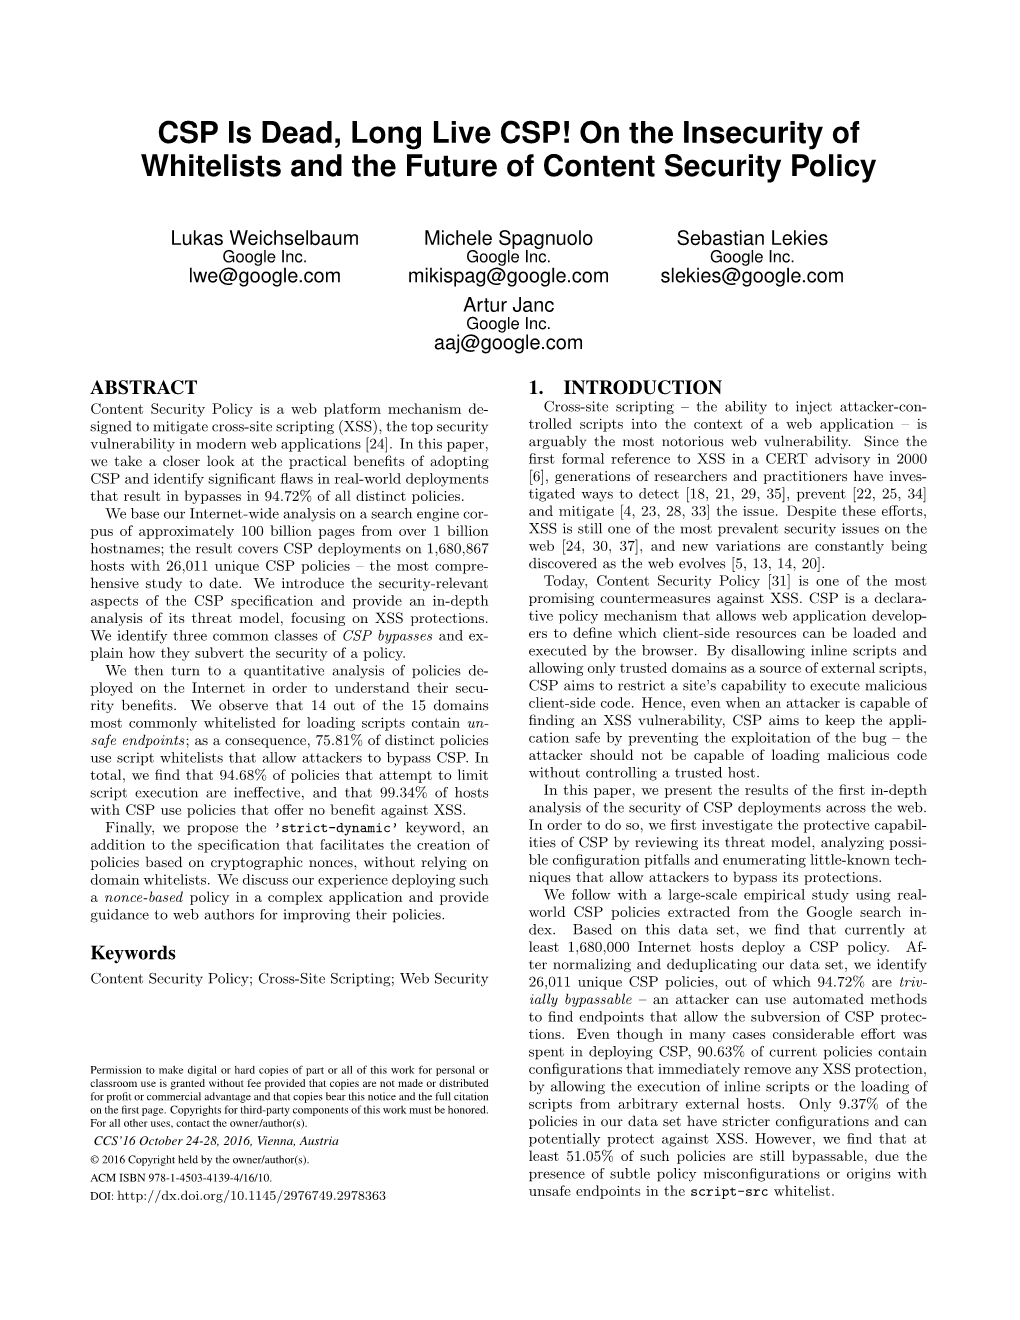 On the Insecurity of Whitelists and the Future of Content Security Policy